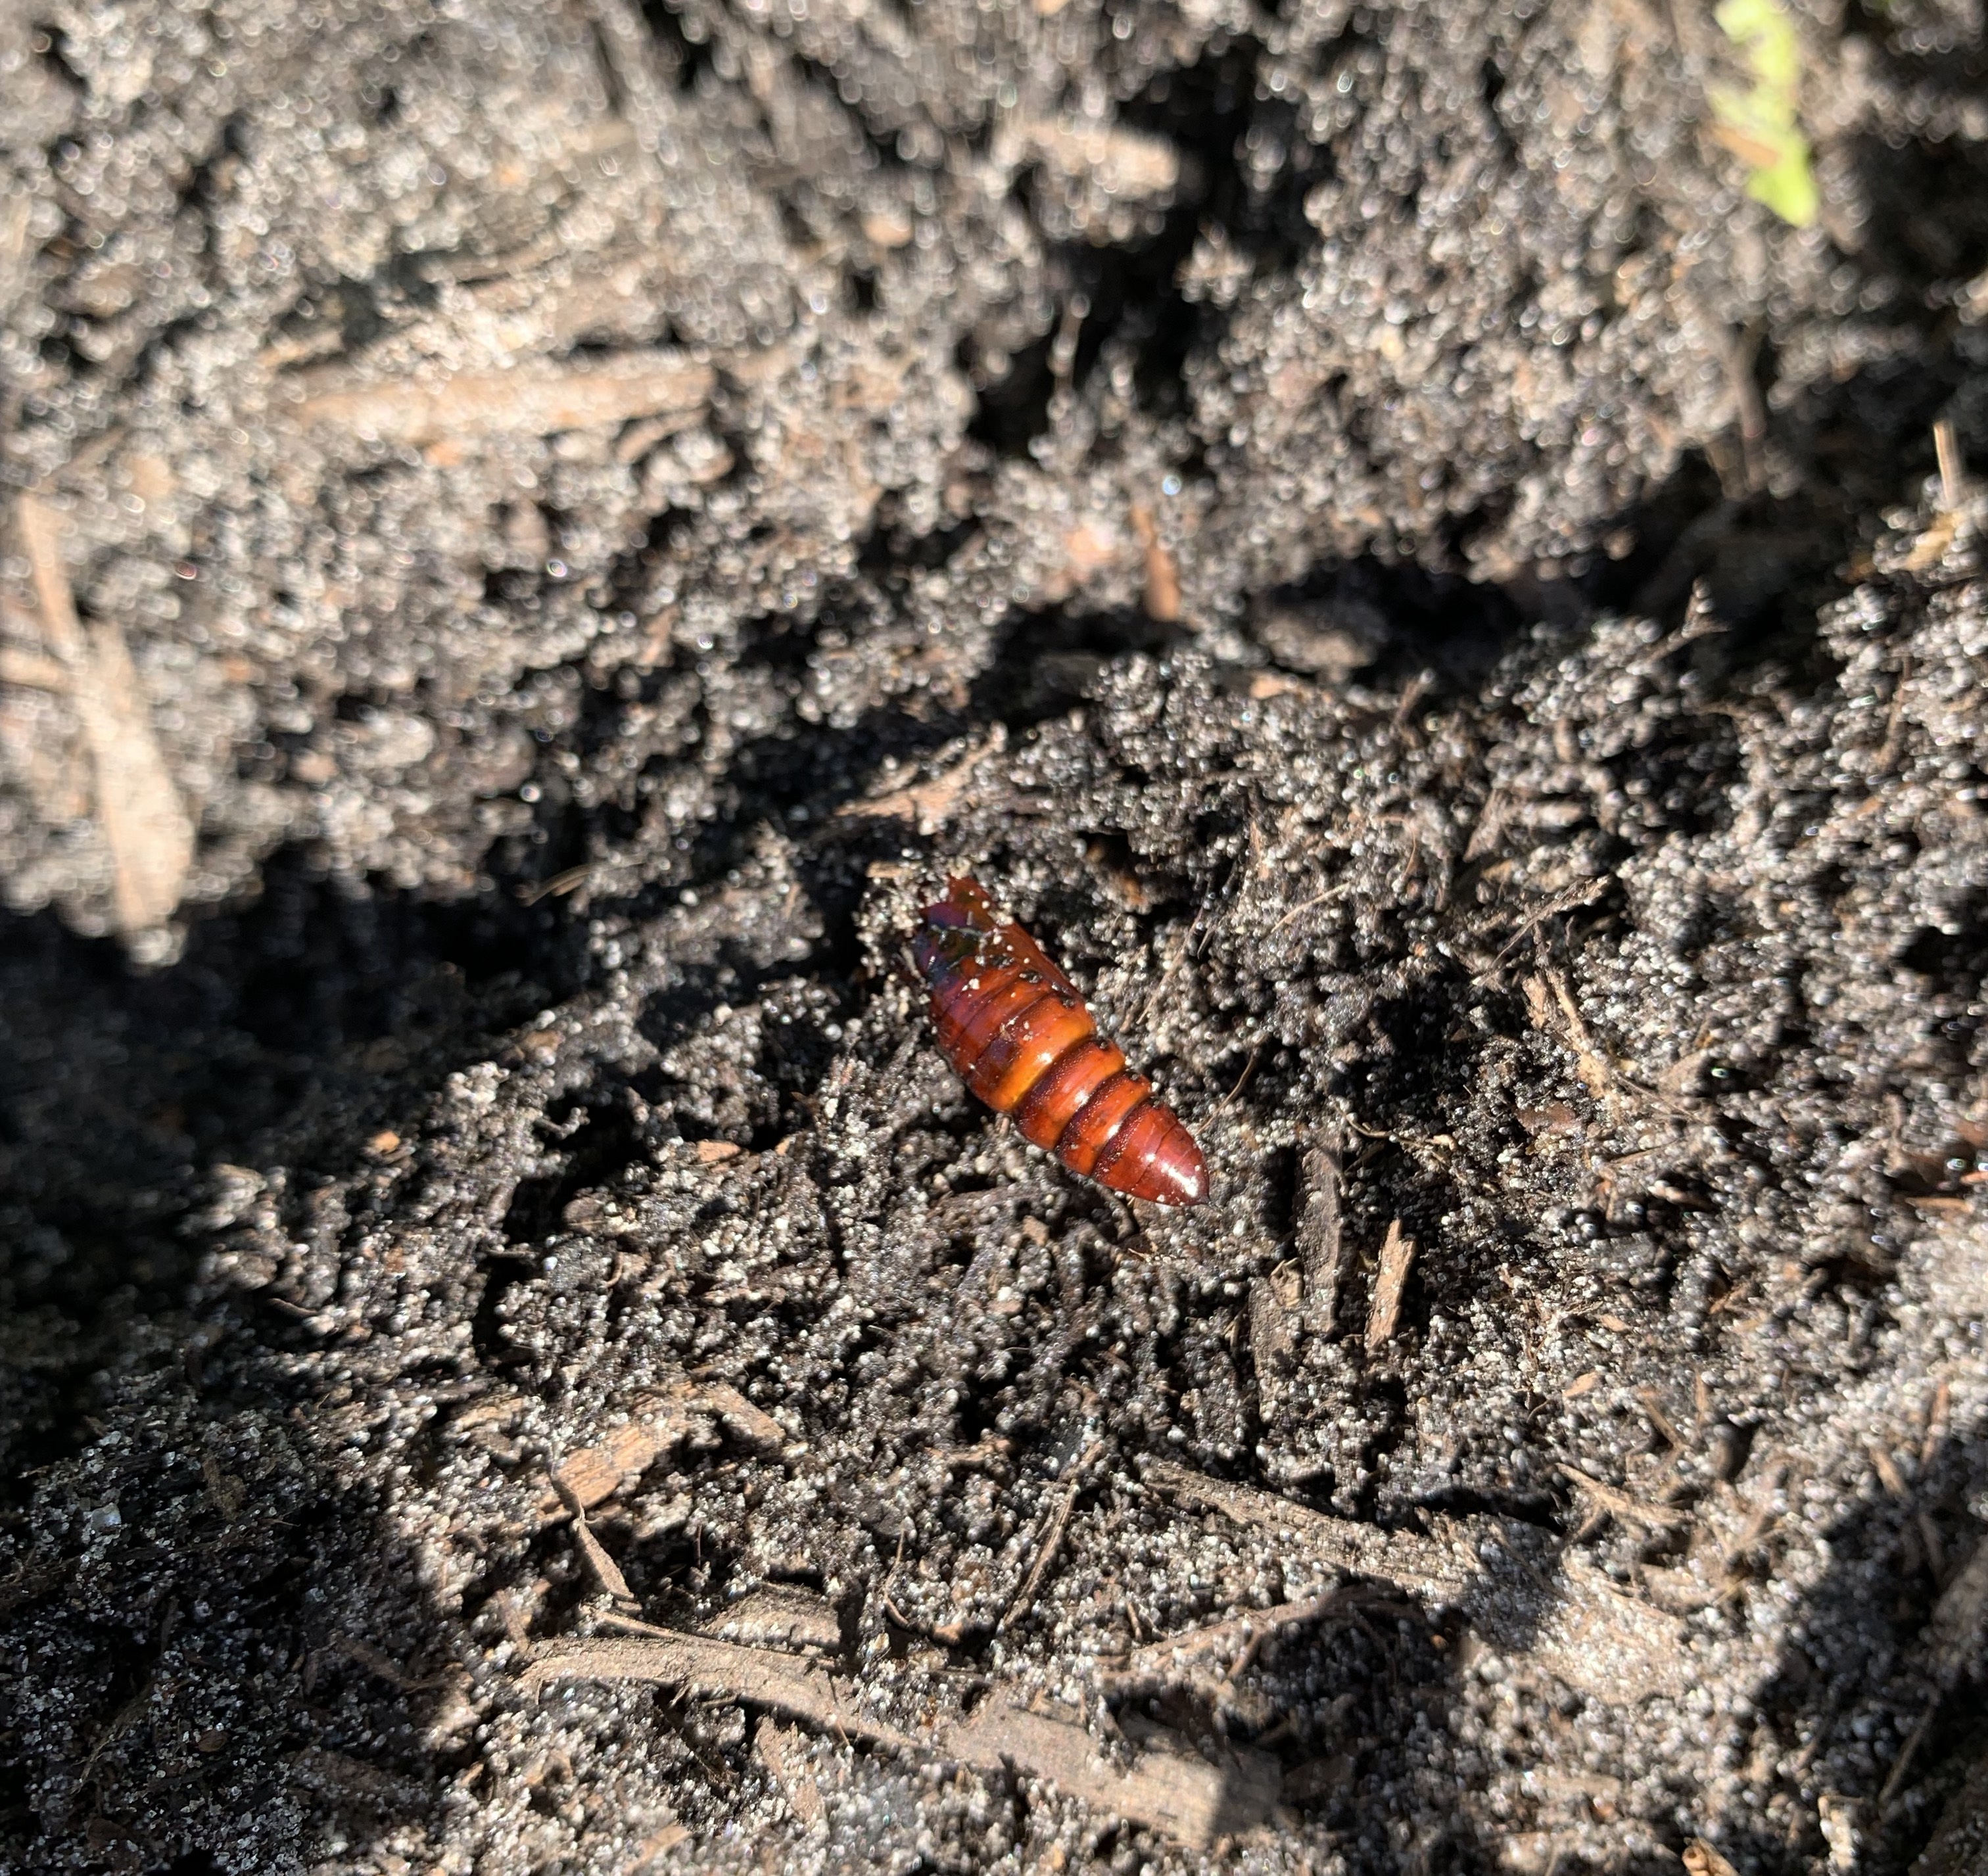 This hard orange-red thing in the dirt is cutworm pupa.